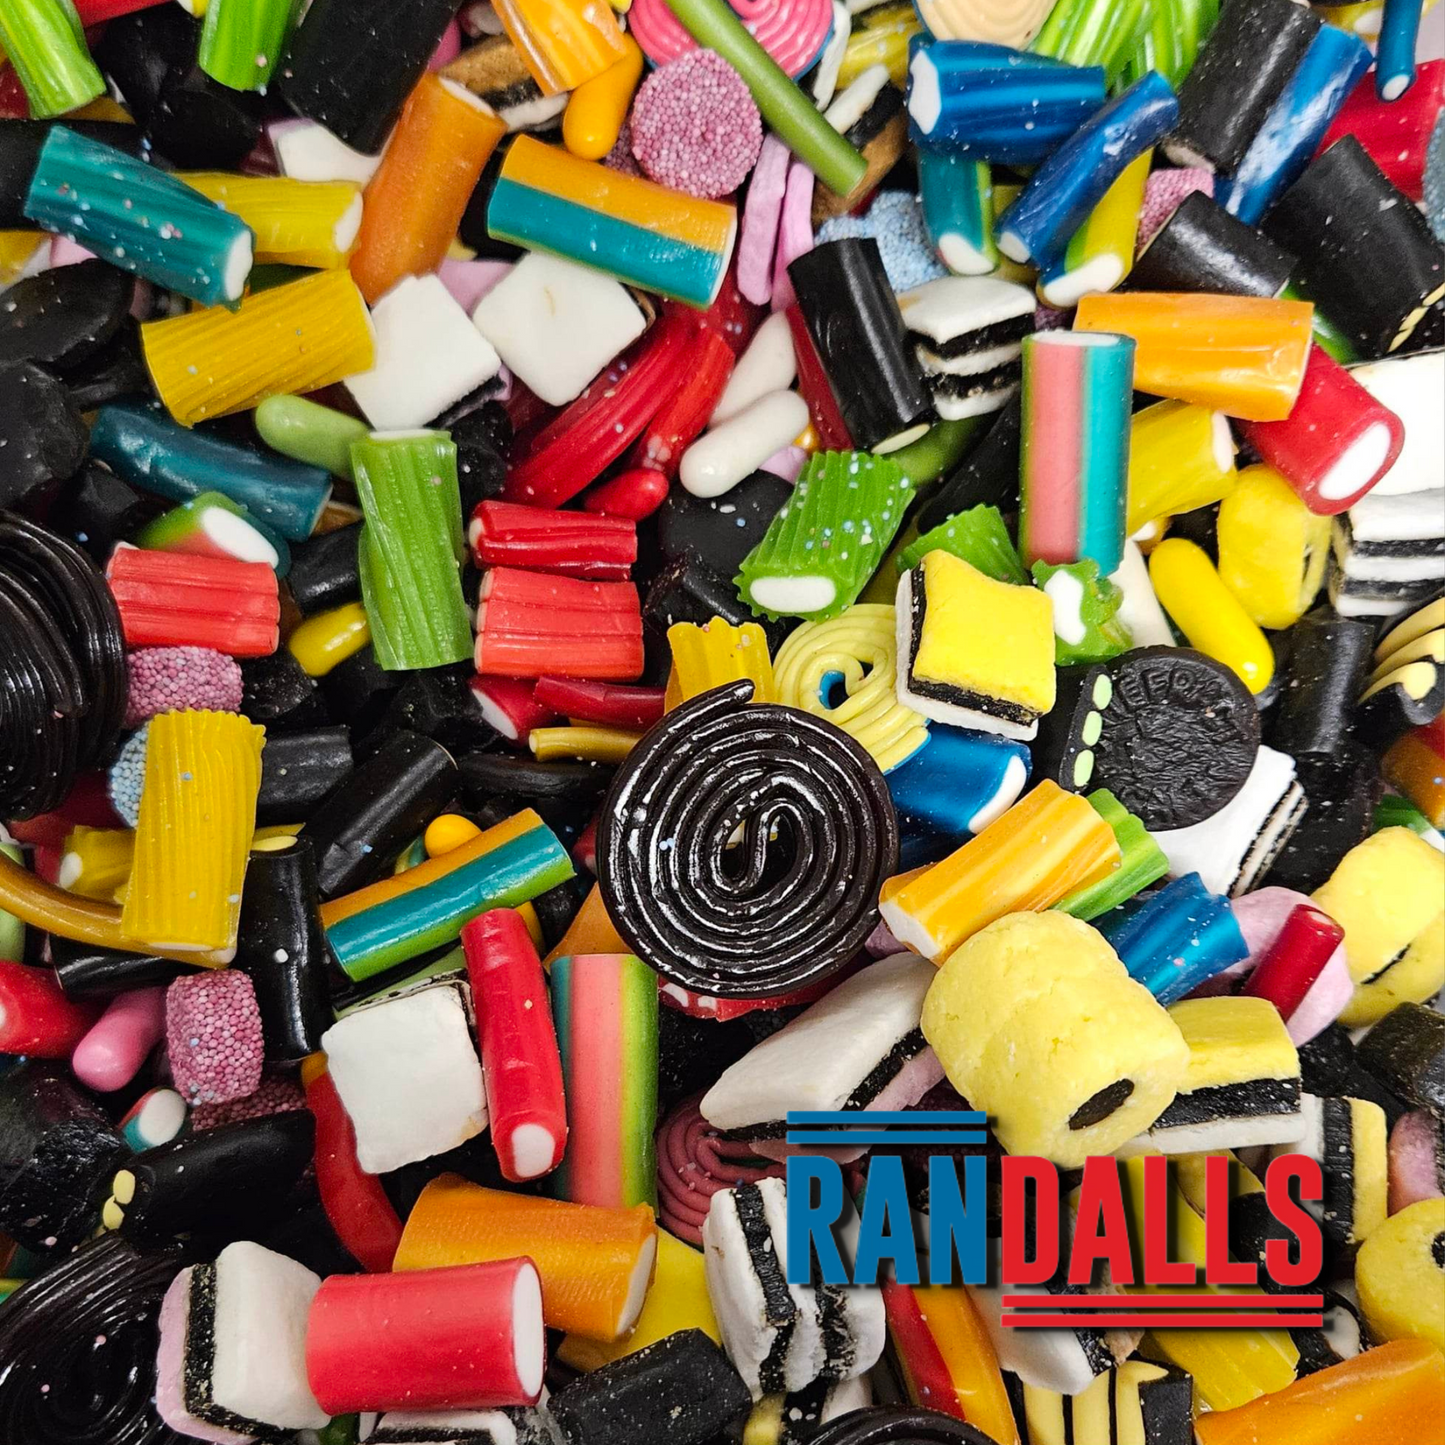 pick'n'mix liquorice mix, chewy sweets, candy, aniseed, randalls